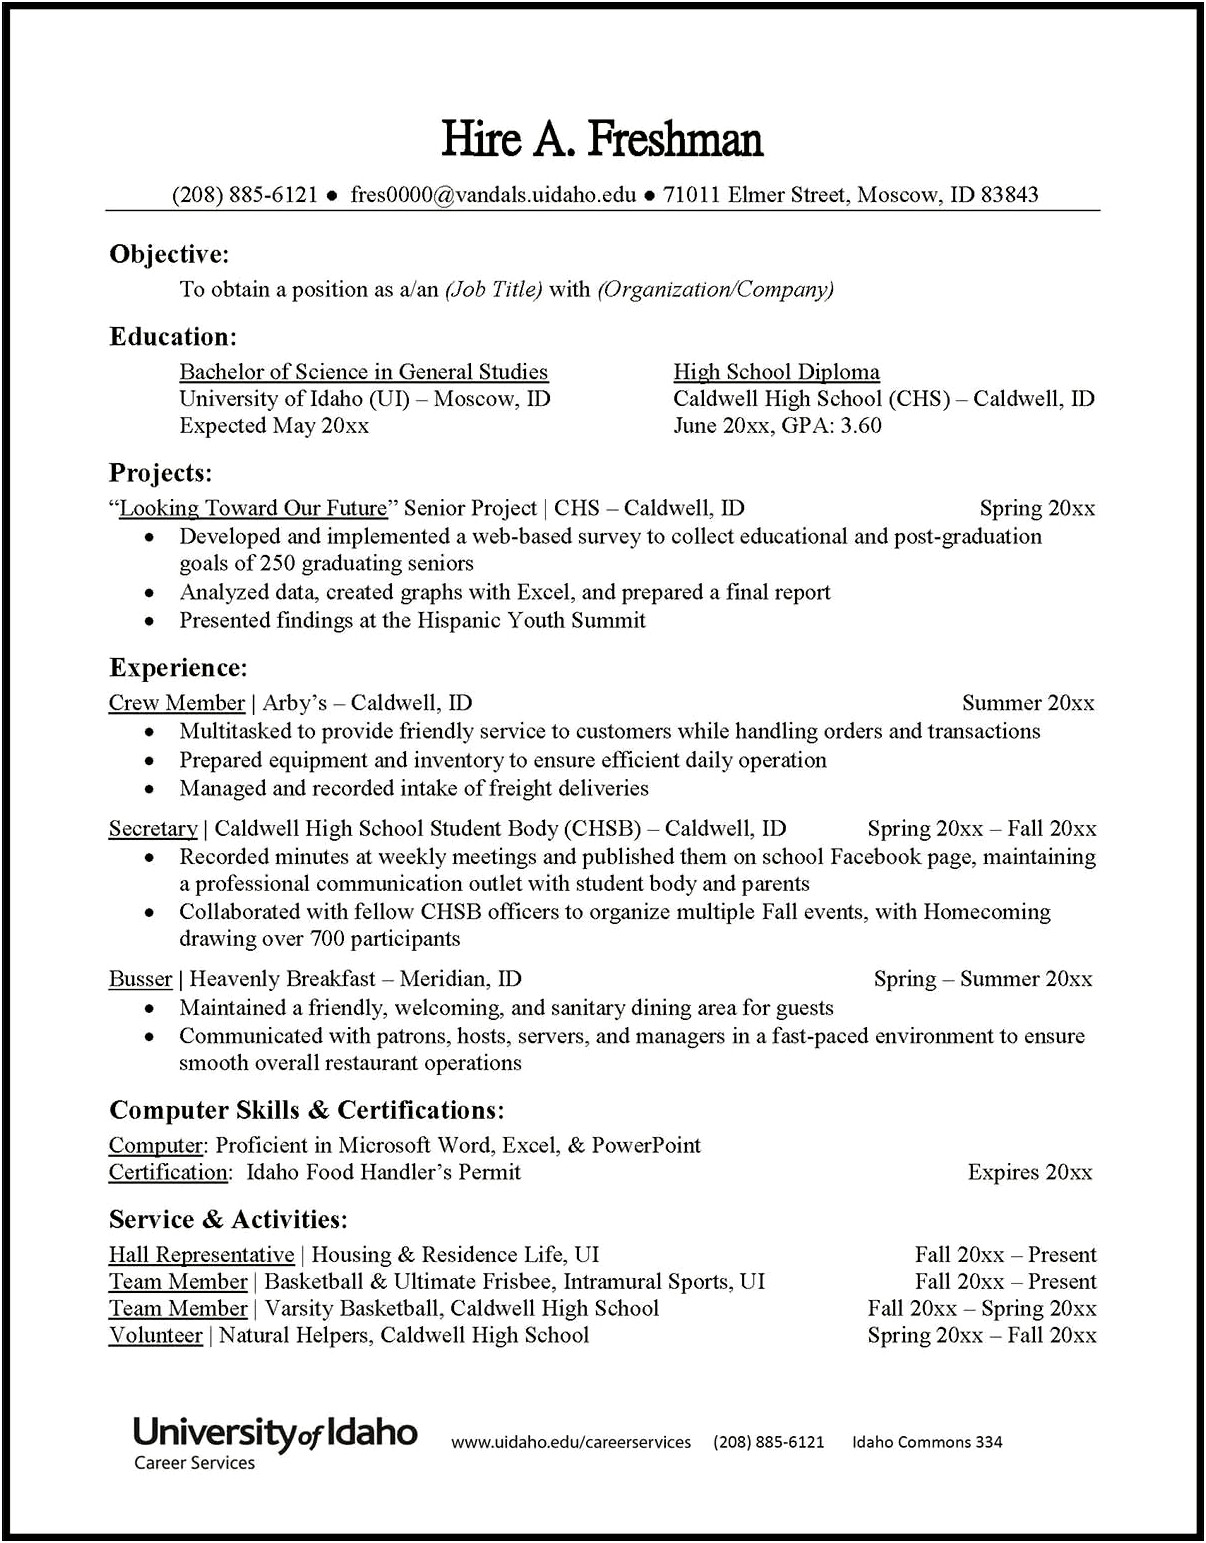 Sample Resume With Different Positions At Same Company